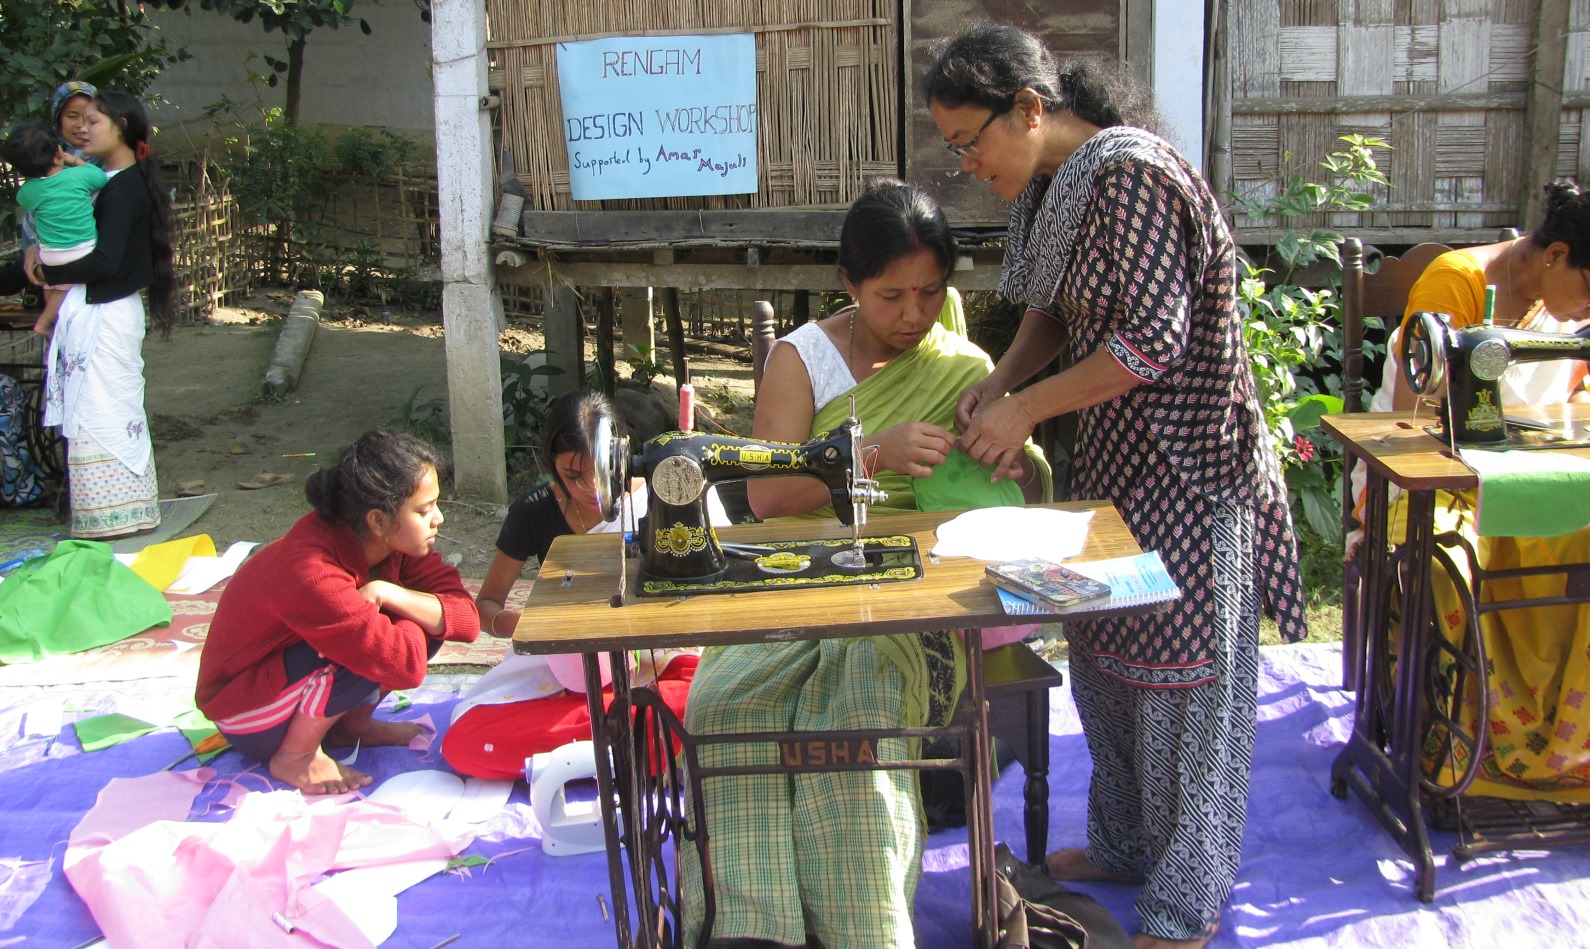 Women working on projects in the Rengam weaving cooperative. Photo courtesy of Gili Navon